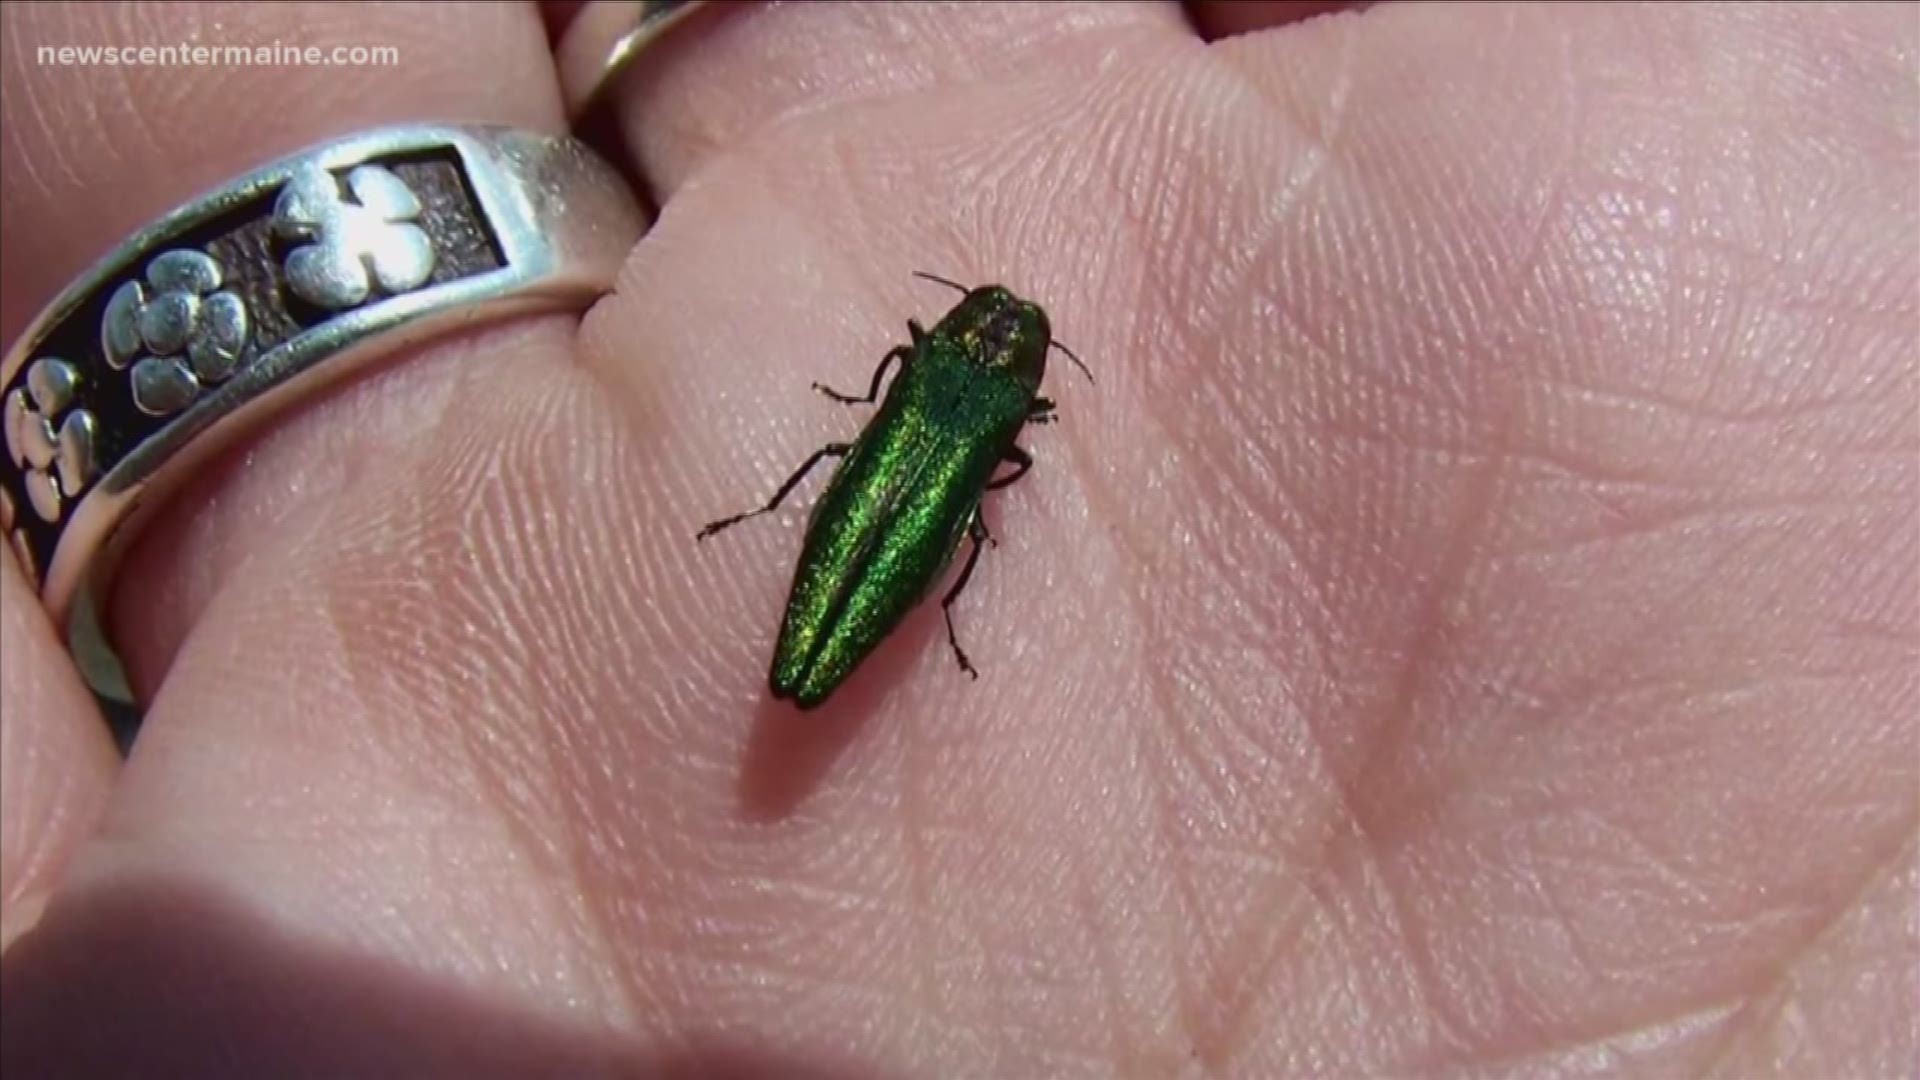 The Maine Forest Service is doing battle with the Emerald Ash Borer. The agency plans to release "parasitoids" to attack the pesky bugs.